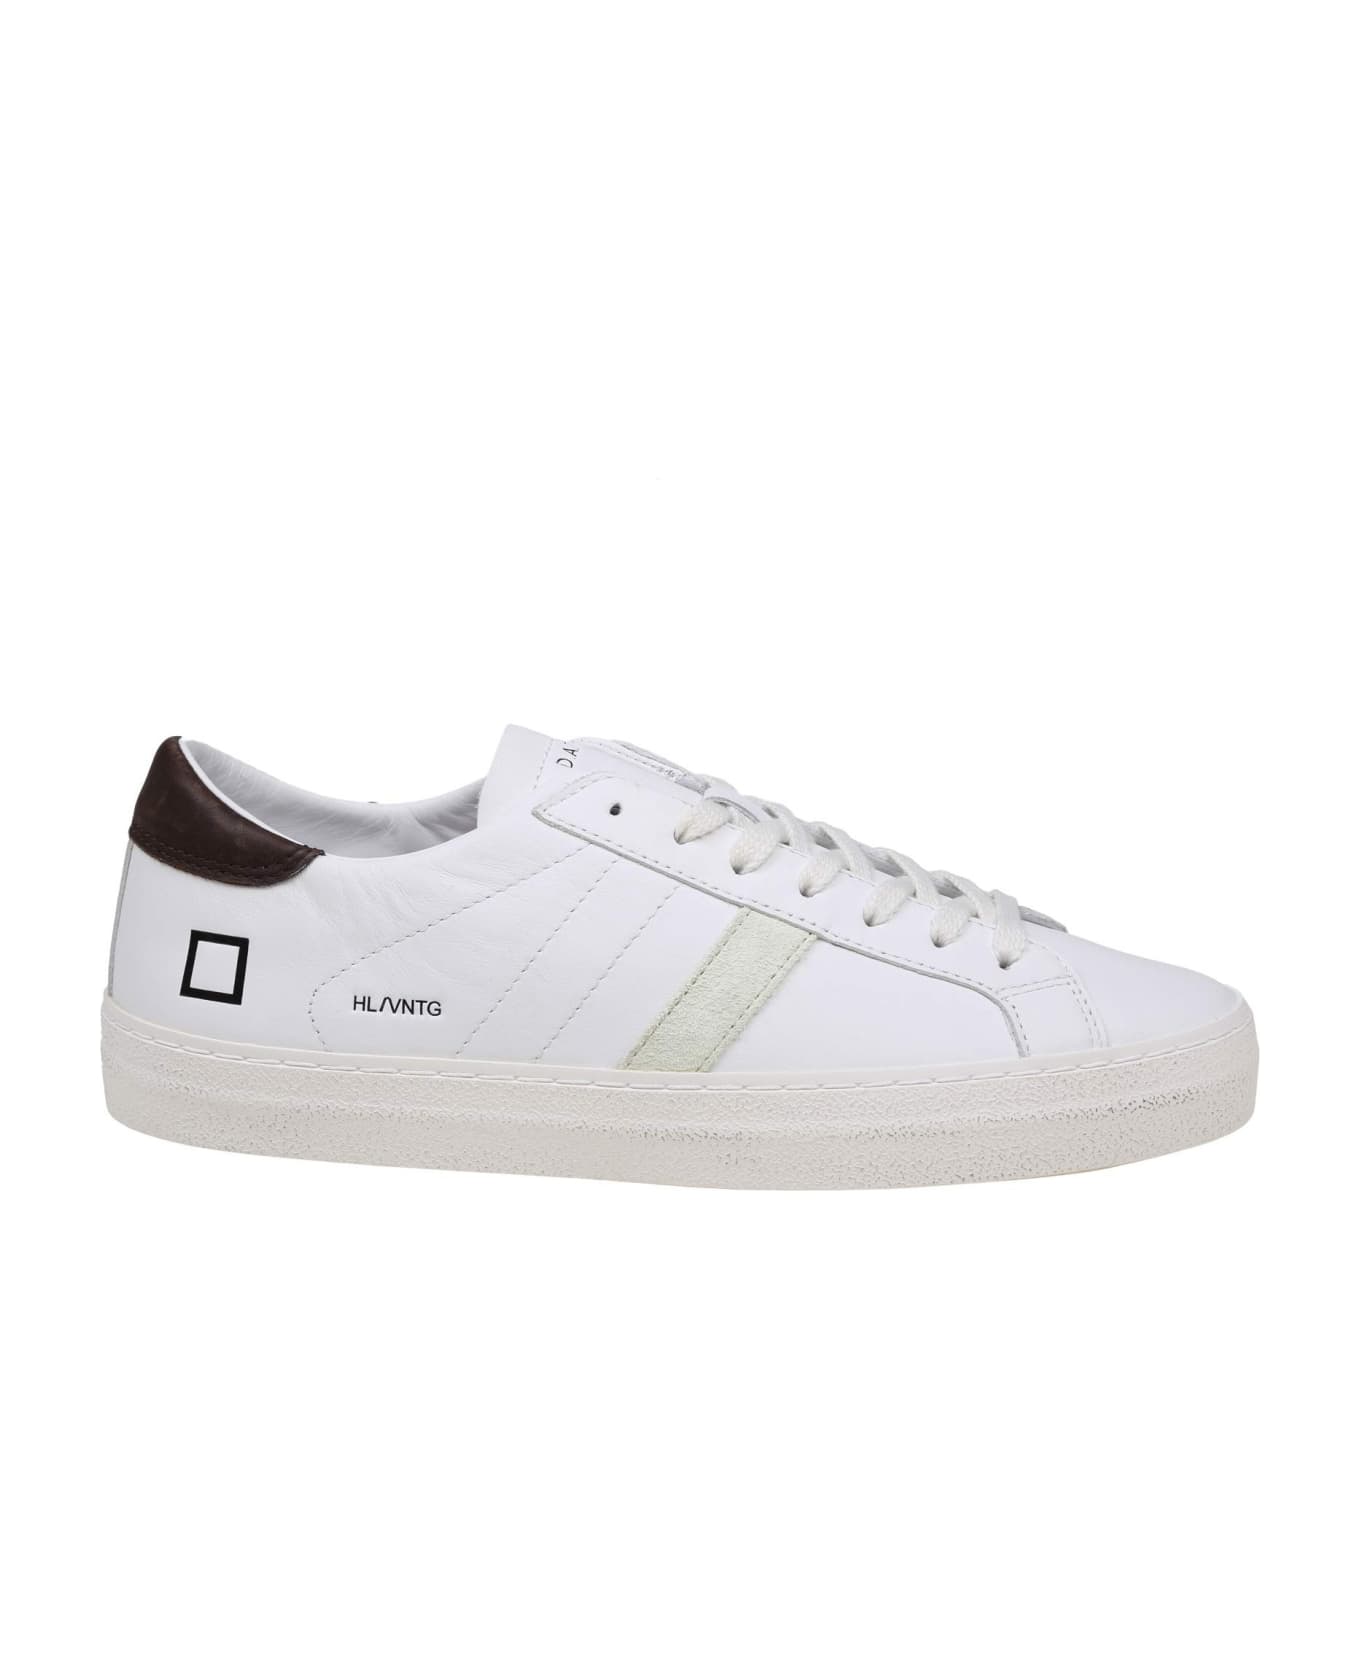 D.A.T.E. Hill Low Vintage Sneakers In White/brown Leather - WHITE/MORO スニーカー